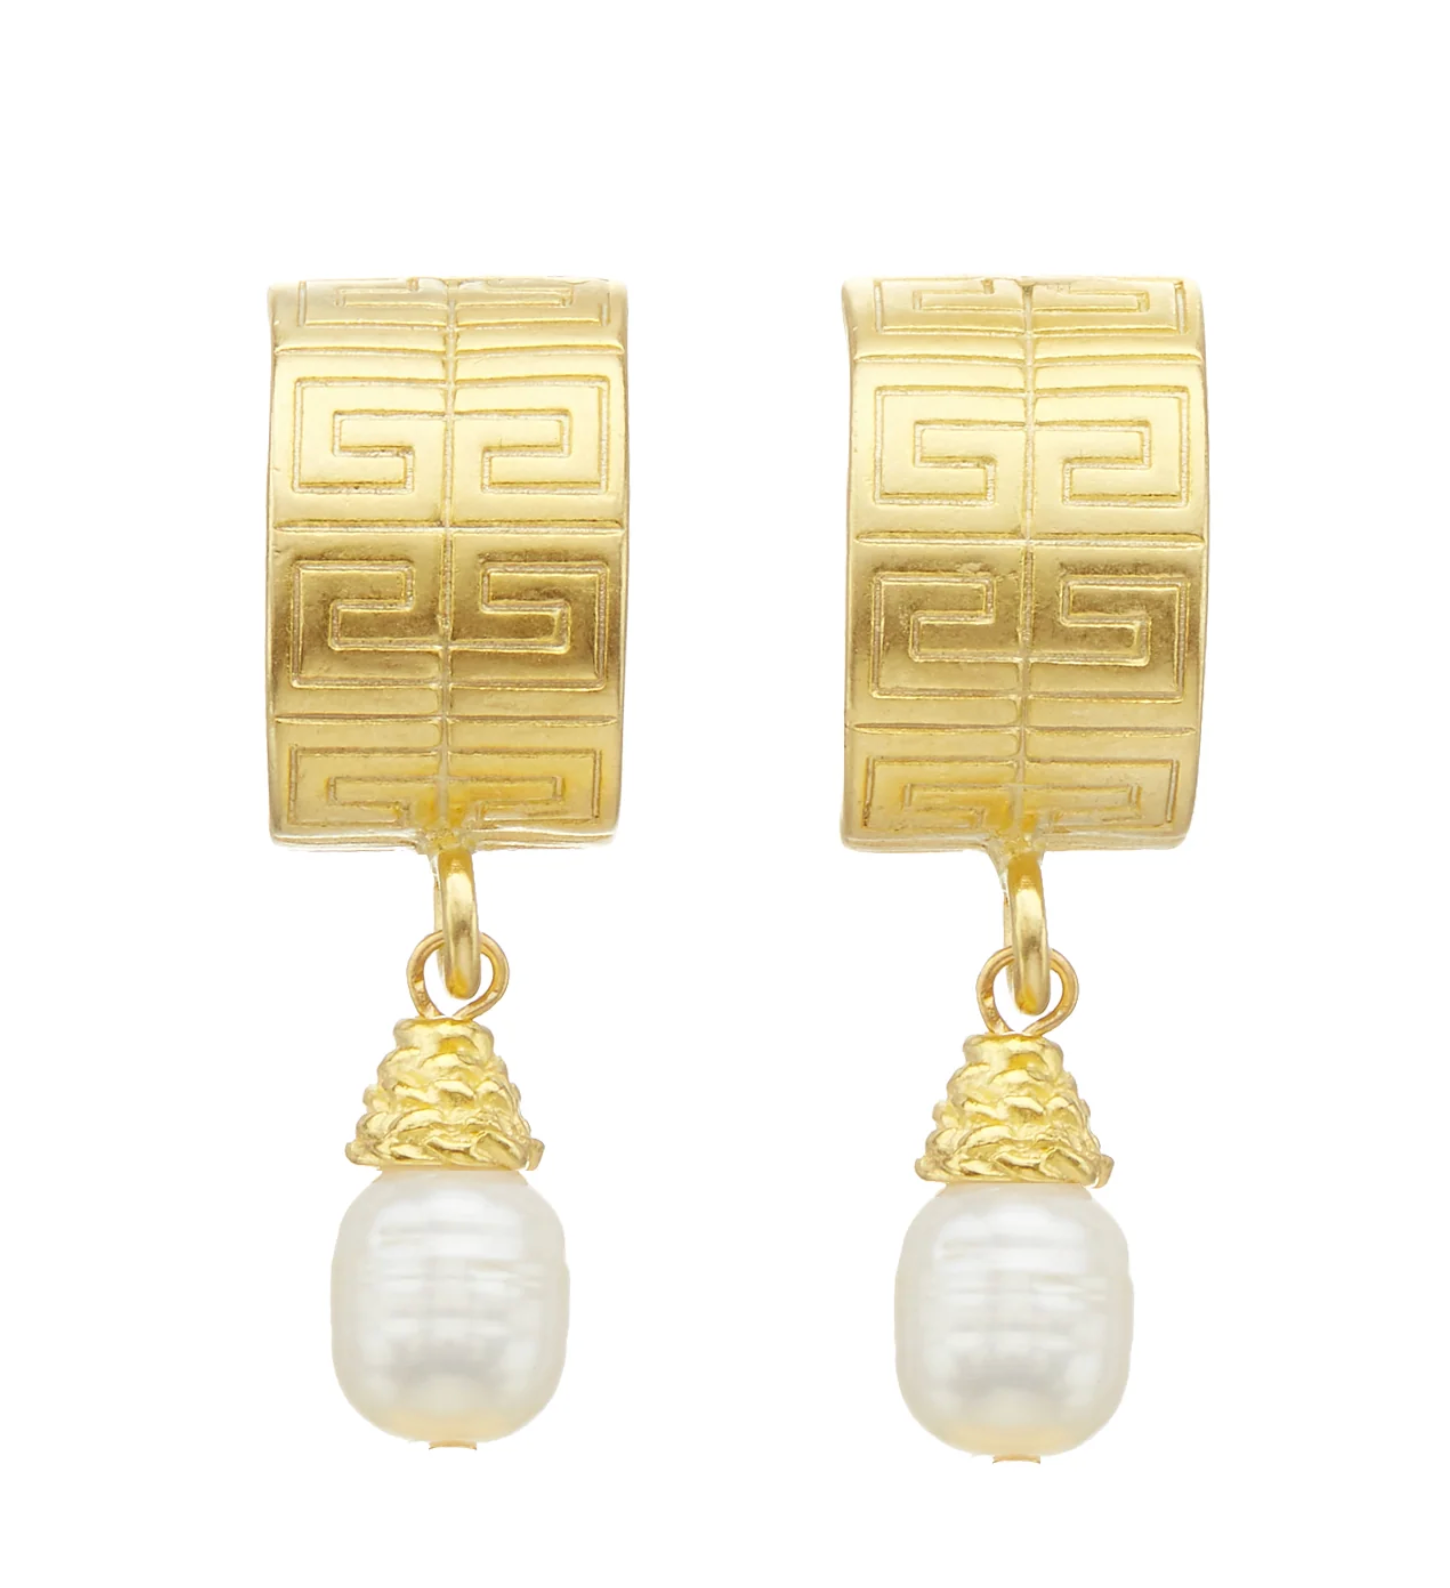 Guest Pearl Drop Earrings - The French Shoppe